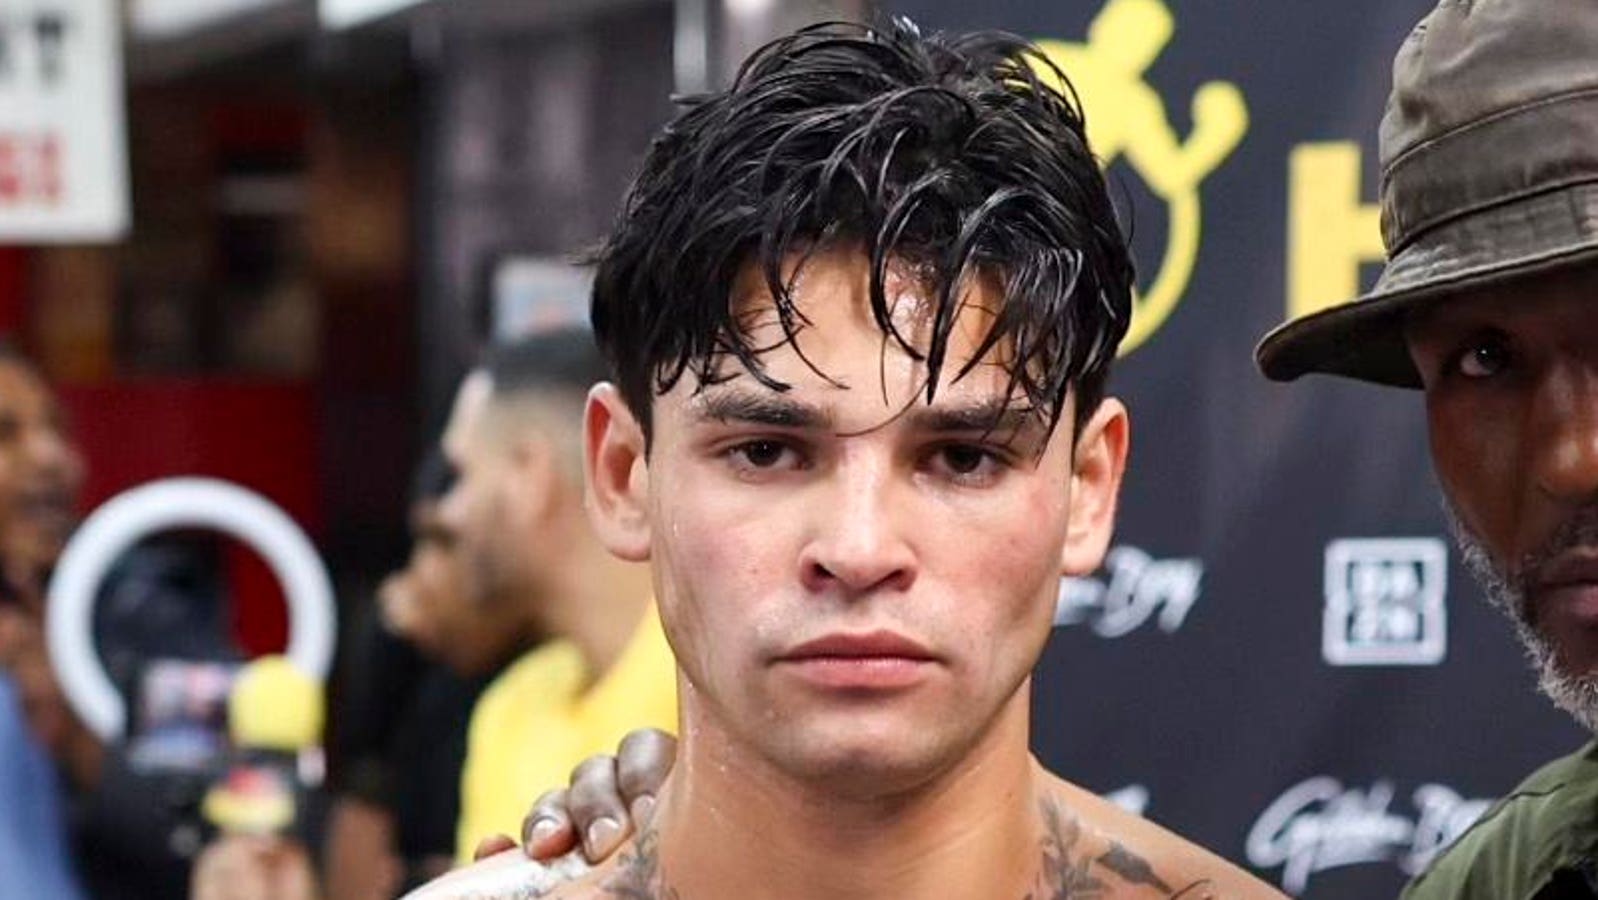 Ryan Garcia Grossly Misses Weight For Devin Haney Fight, Now What?